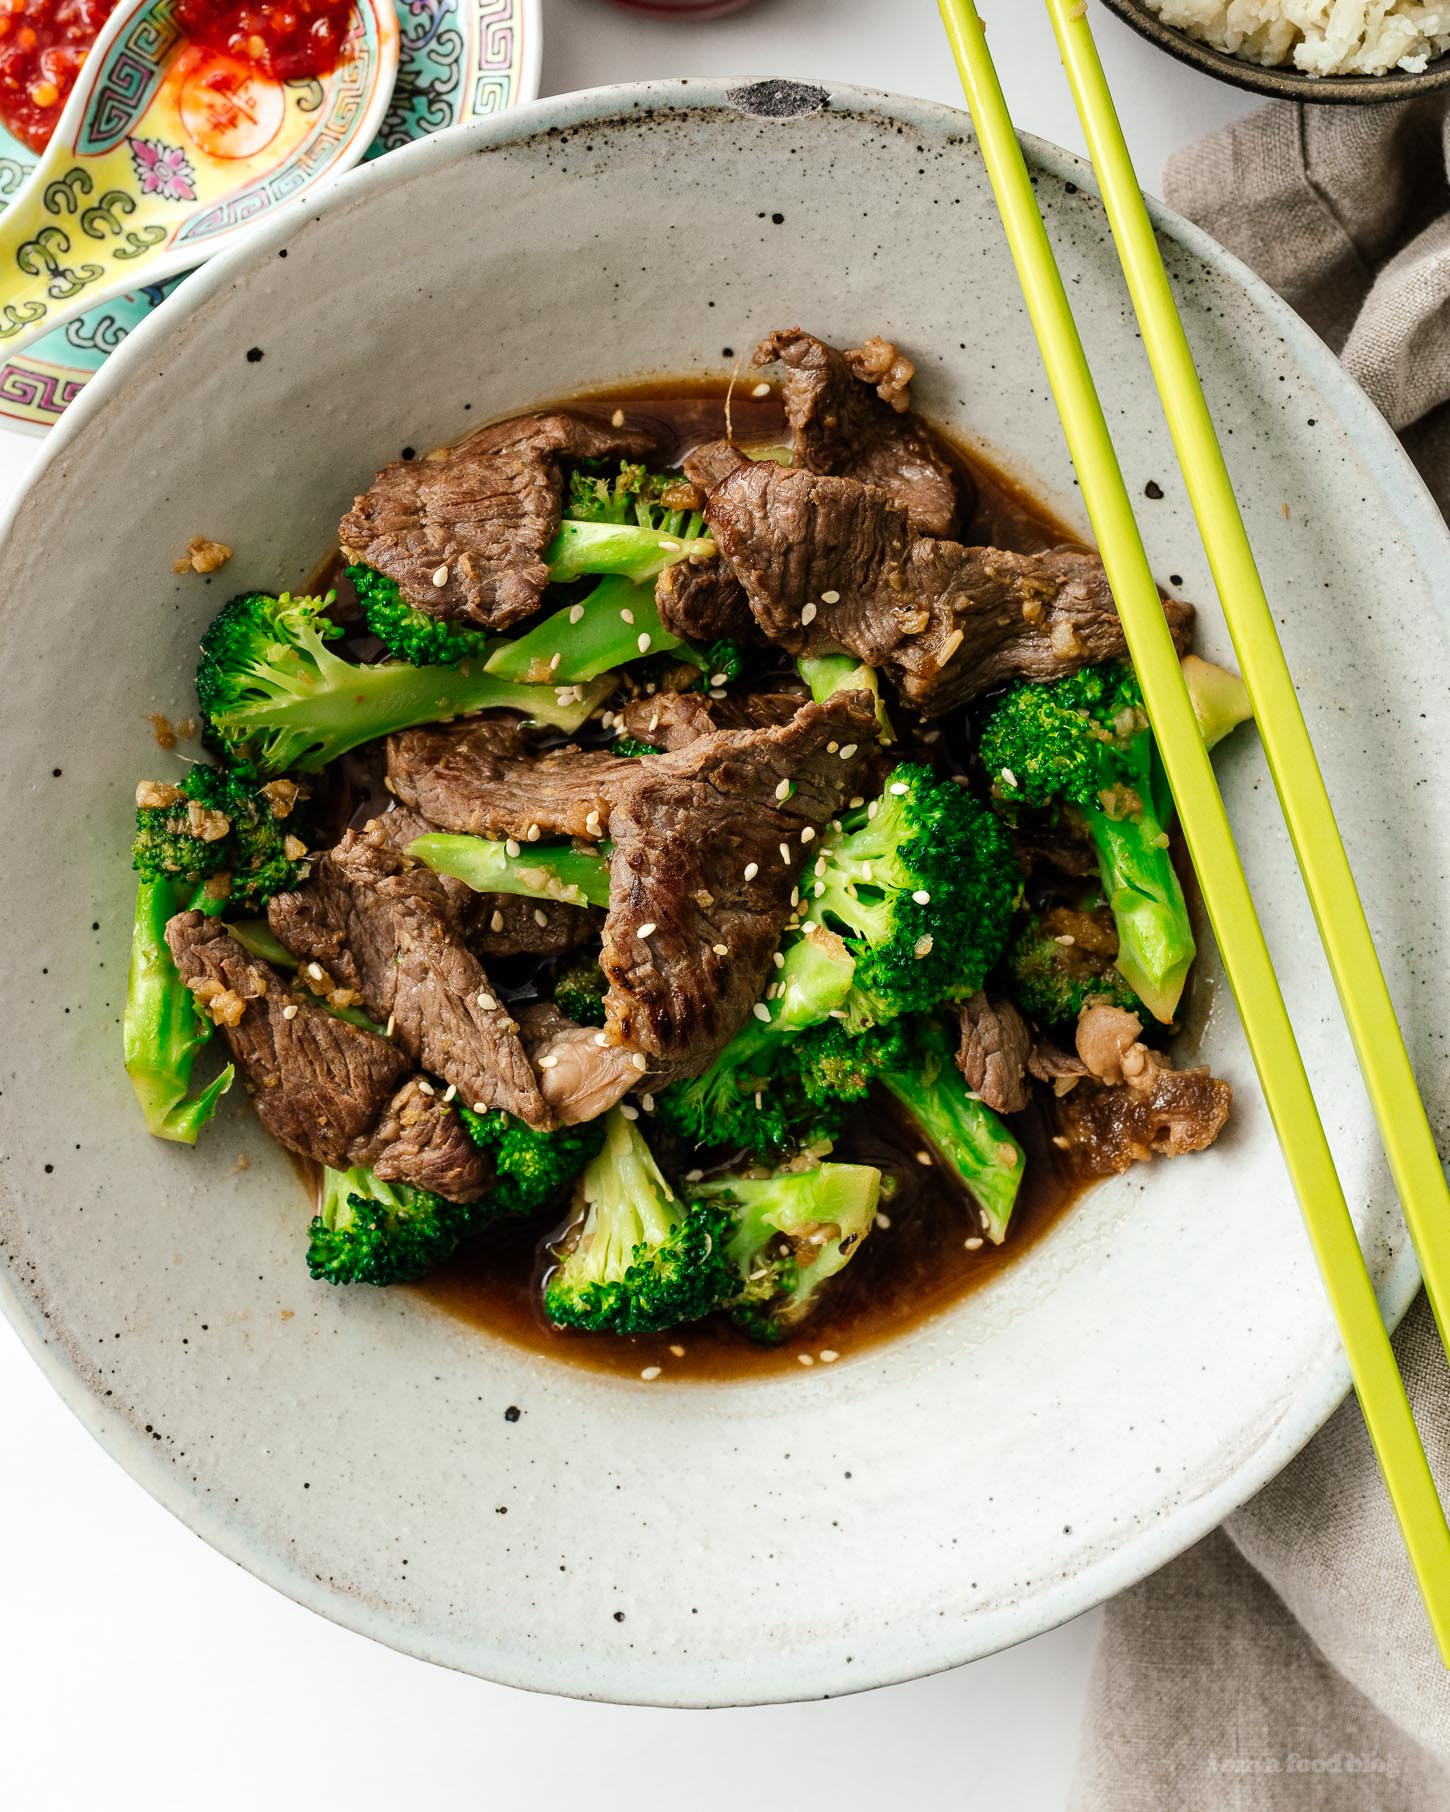 This easy keto friendly low-carb beef and broccoli stir fry is for all my peeps who are trying to enjoy life while still cutting down on carbs. Savory juicy